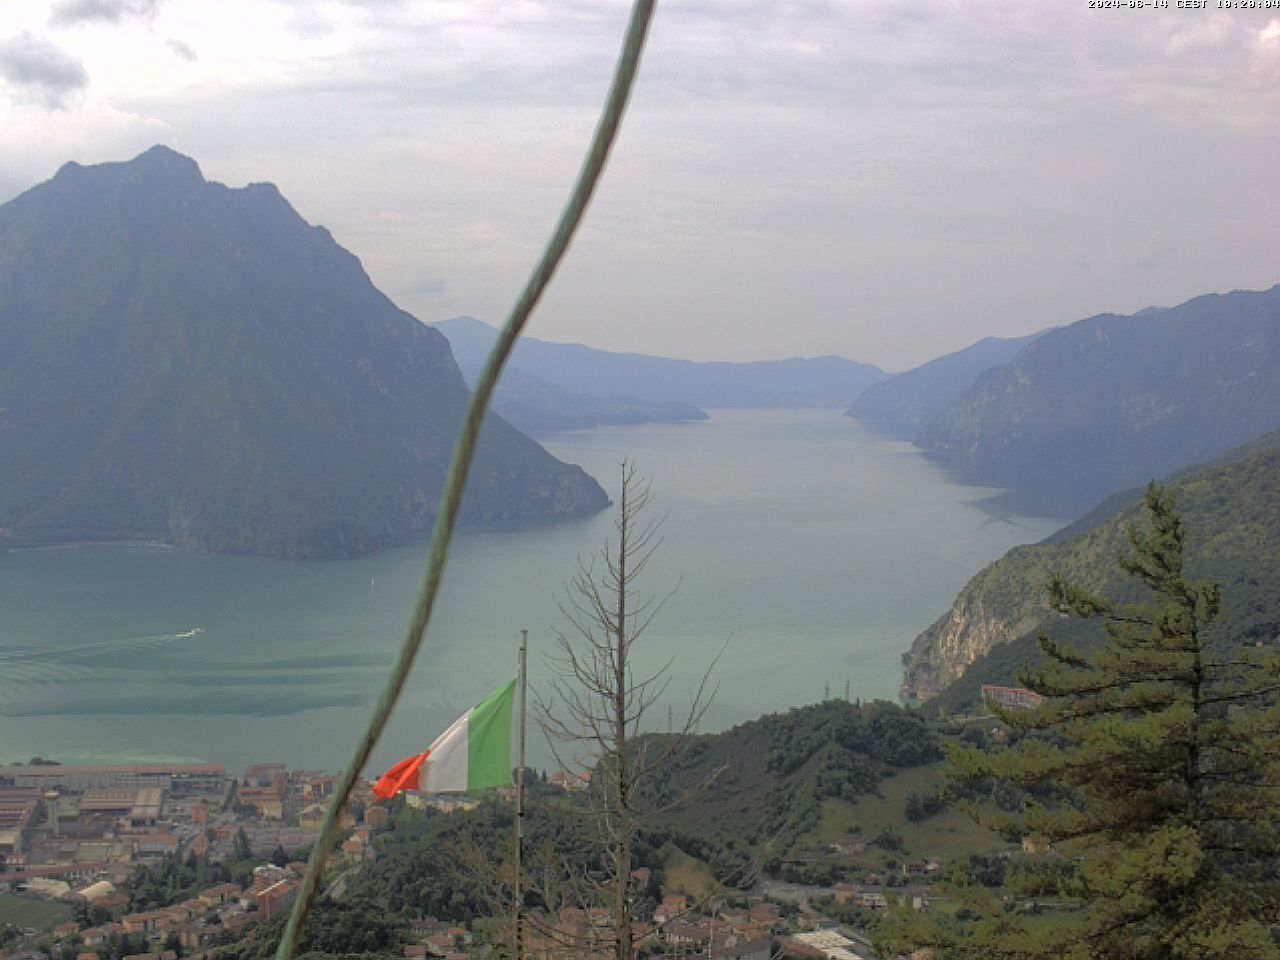 Lovere (Lac d'Iseo) Me. 10:29